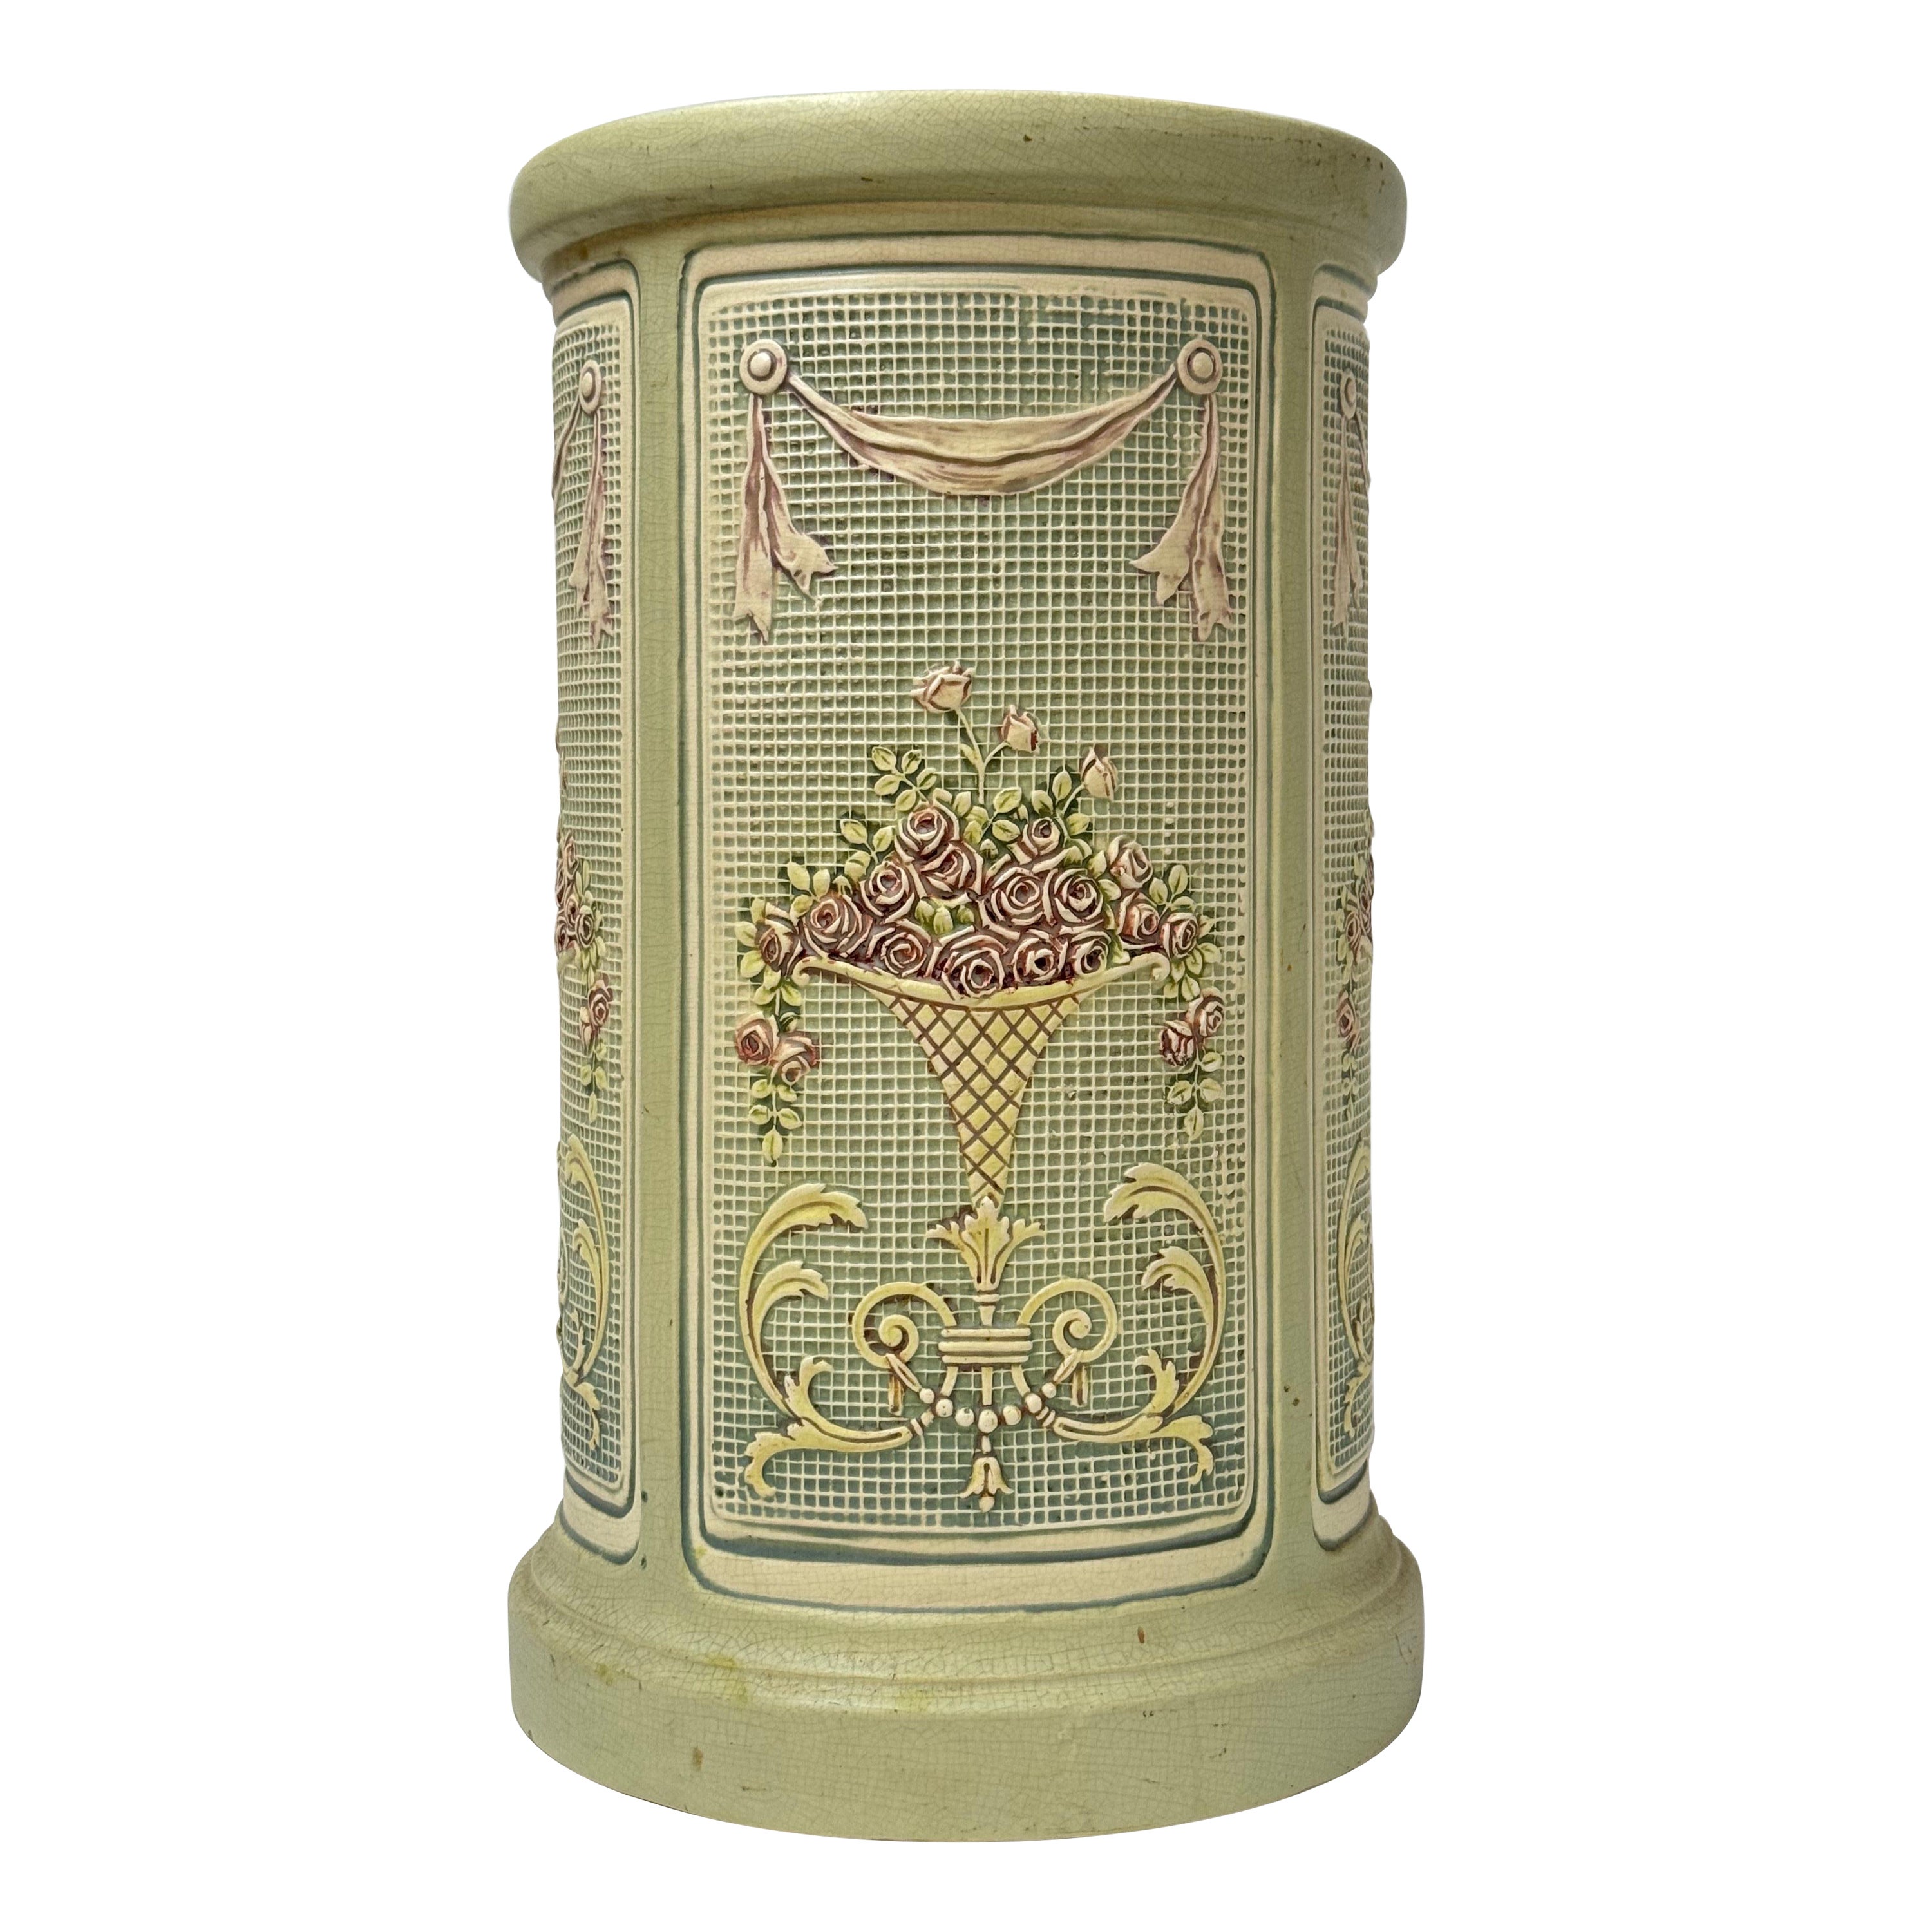 Rare and Collectible Weller Dupont Jardiniere